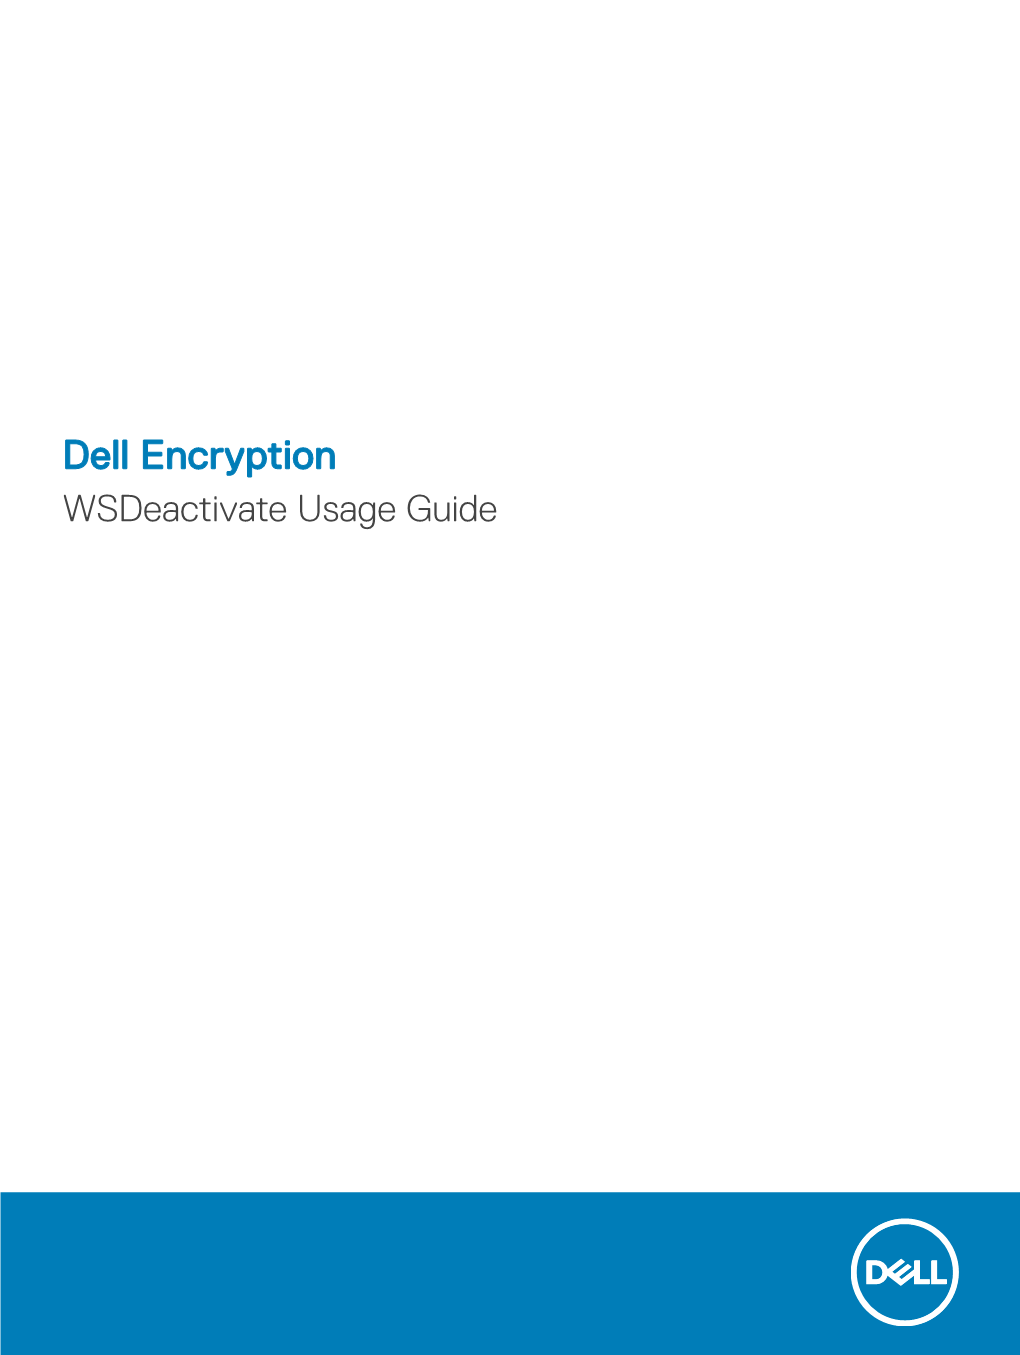 Dell Encryption Wsdeactivate Usage Guide Notes, Cautions, and Warnings